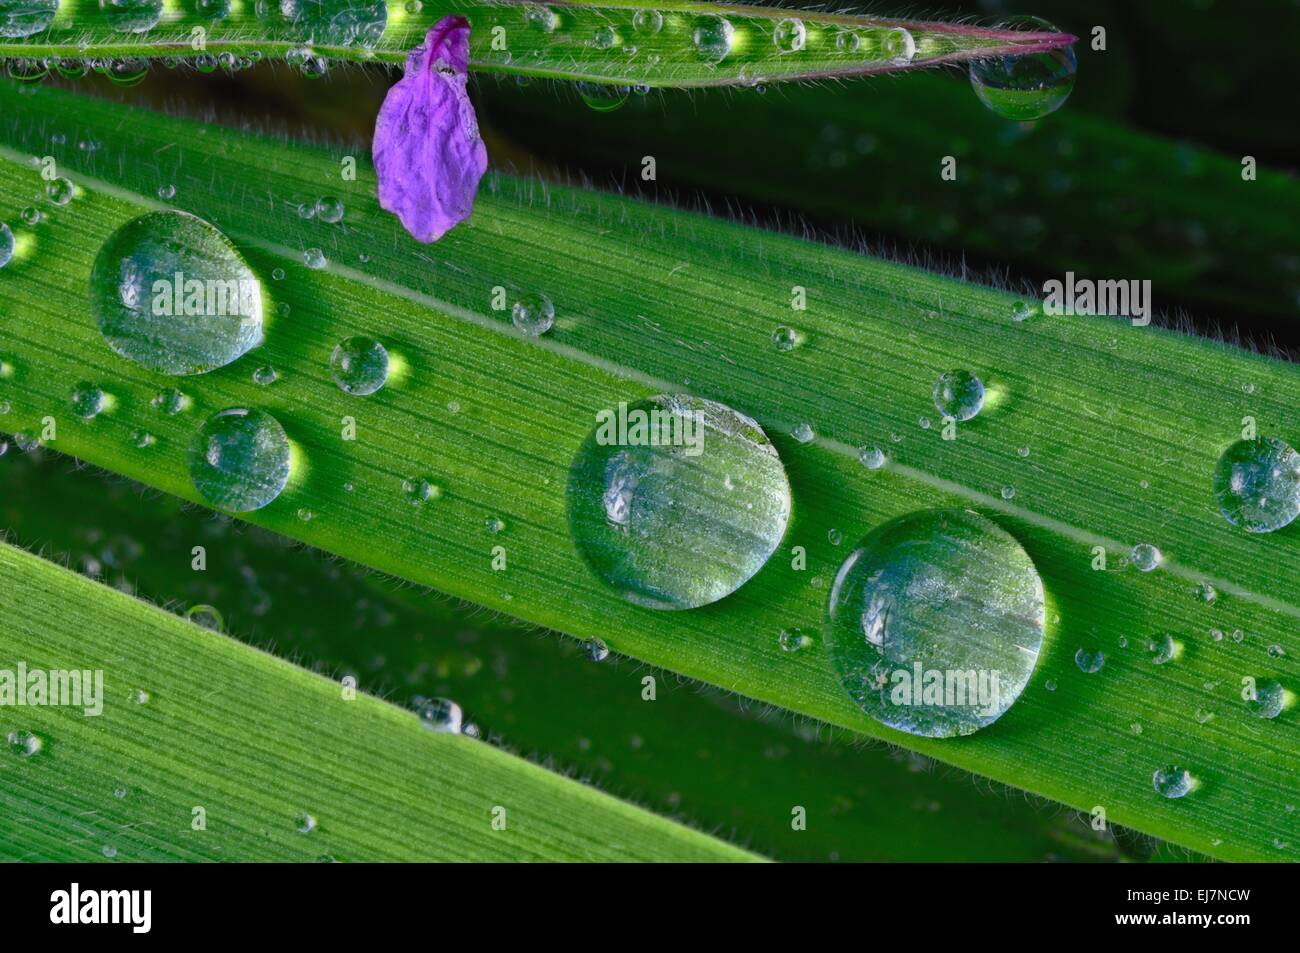 Water beads on the narrow blade of grass Stock Photo